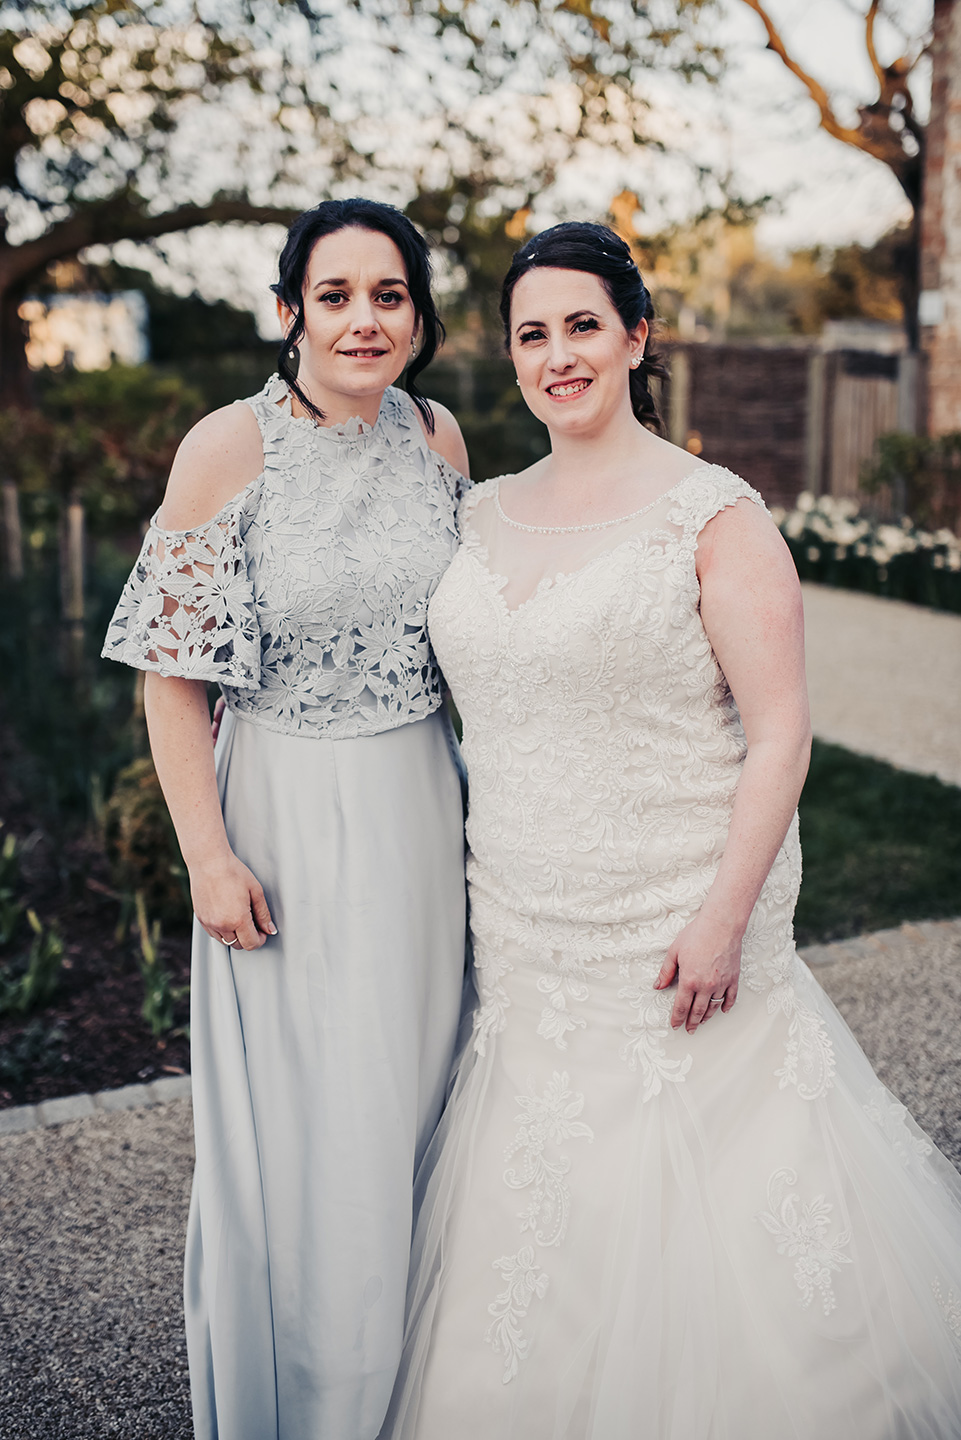 Rachel’s bridesmaid wore a full length silver gown from Coast